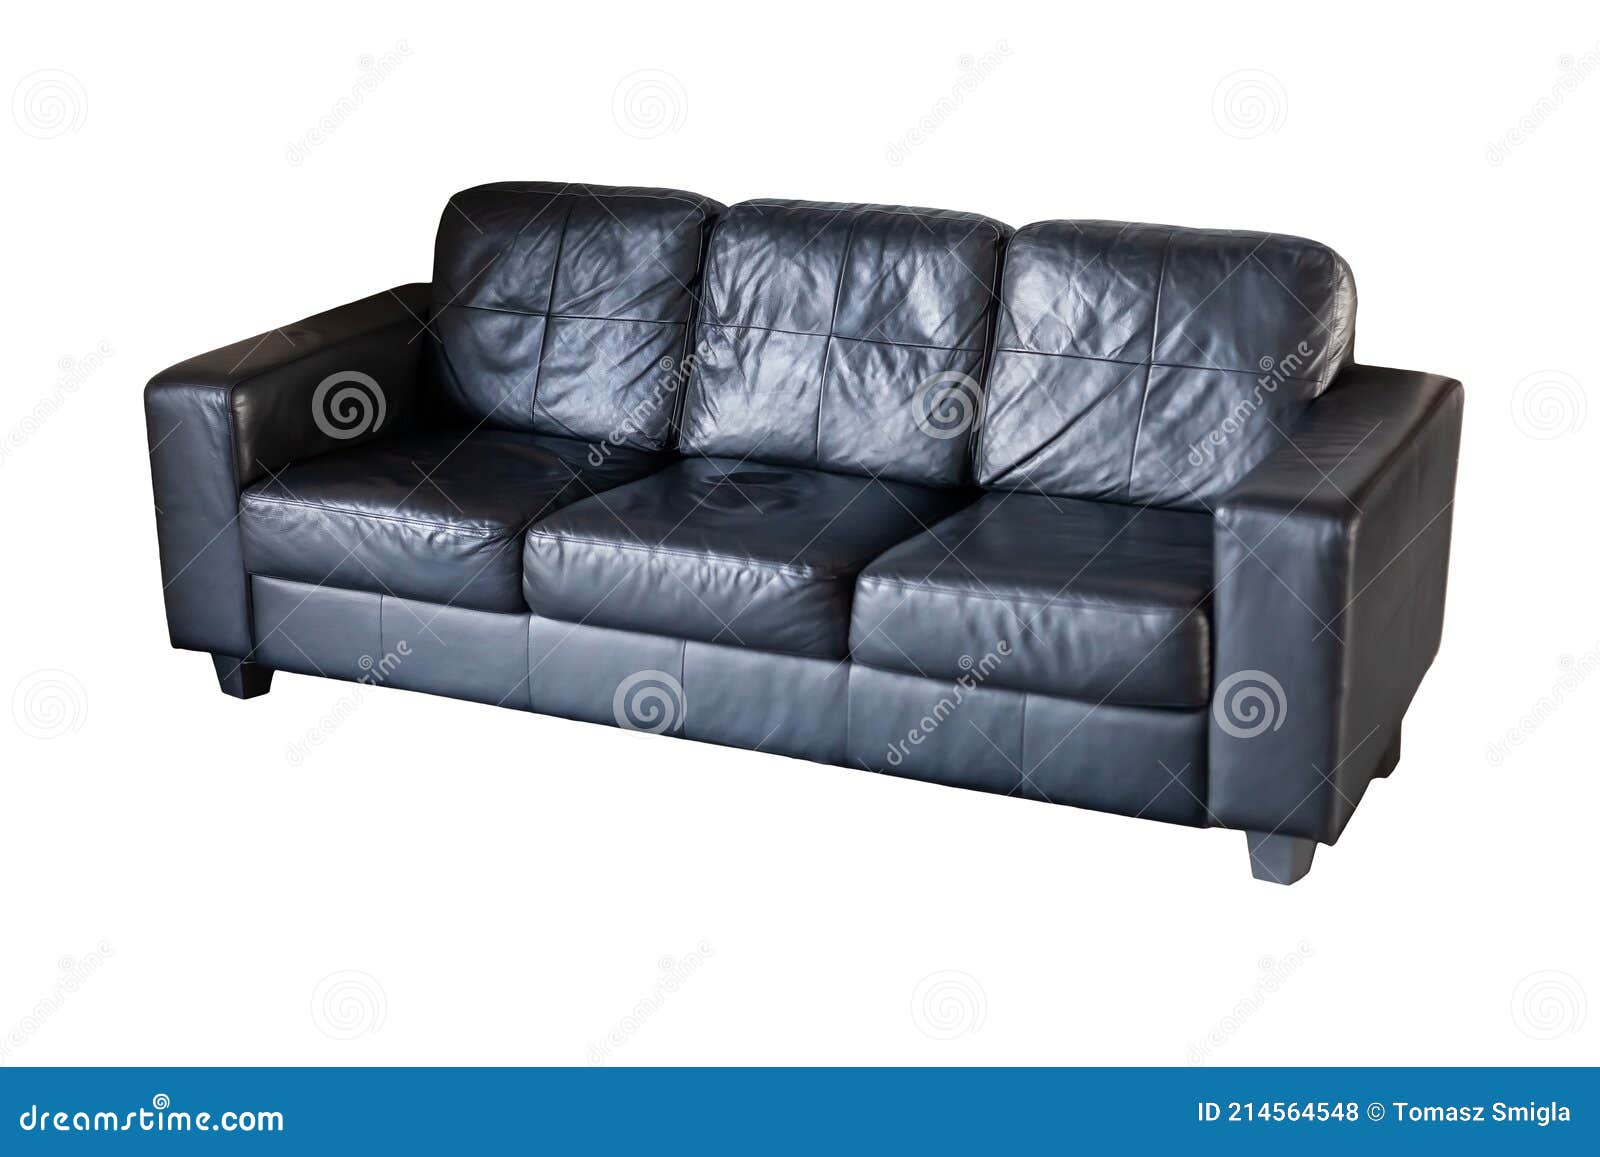 Casting couch black